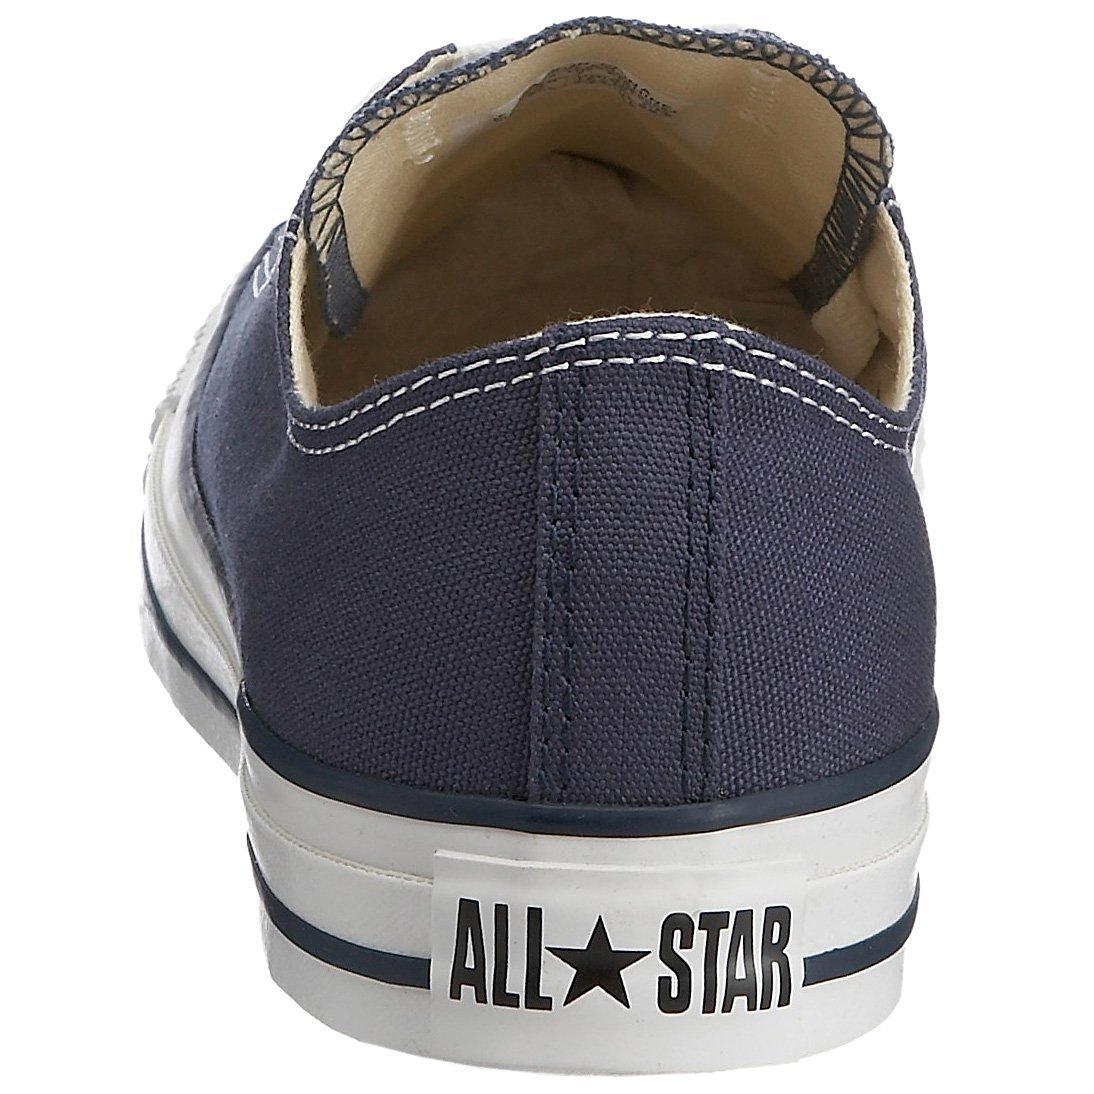 Converse Unisex Chuck low Fashion-Sneakers - image 3 of 7